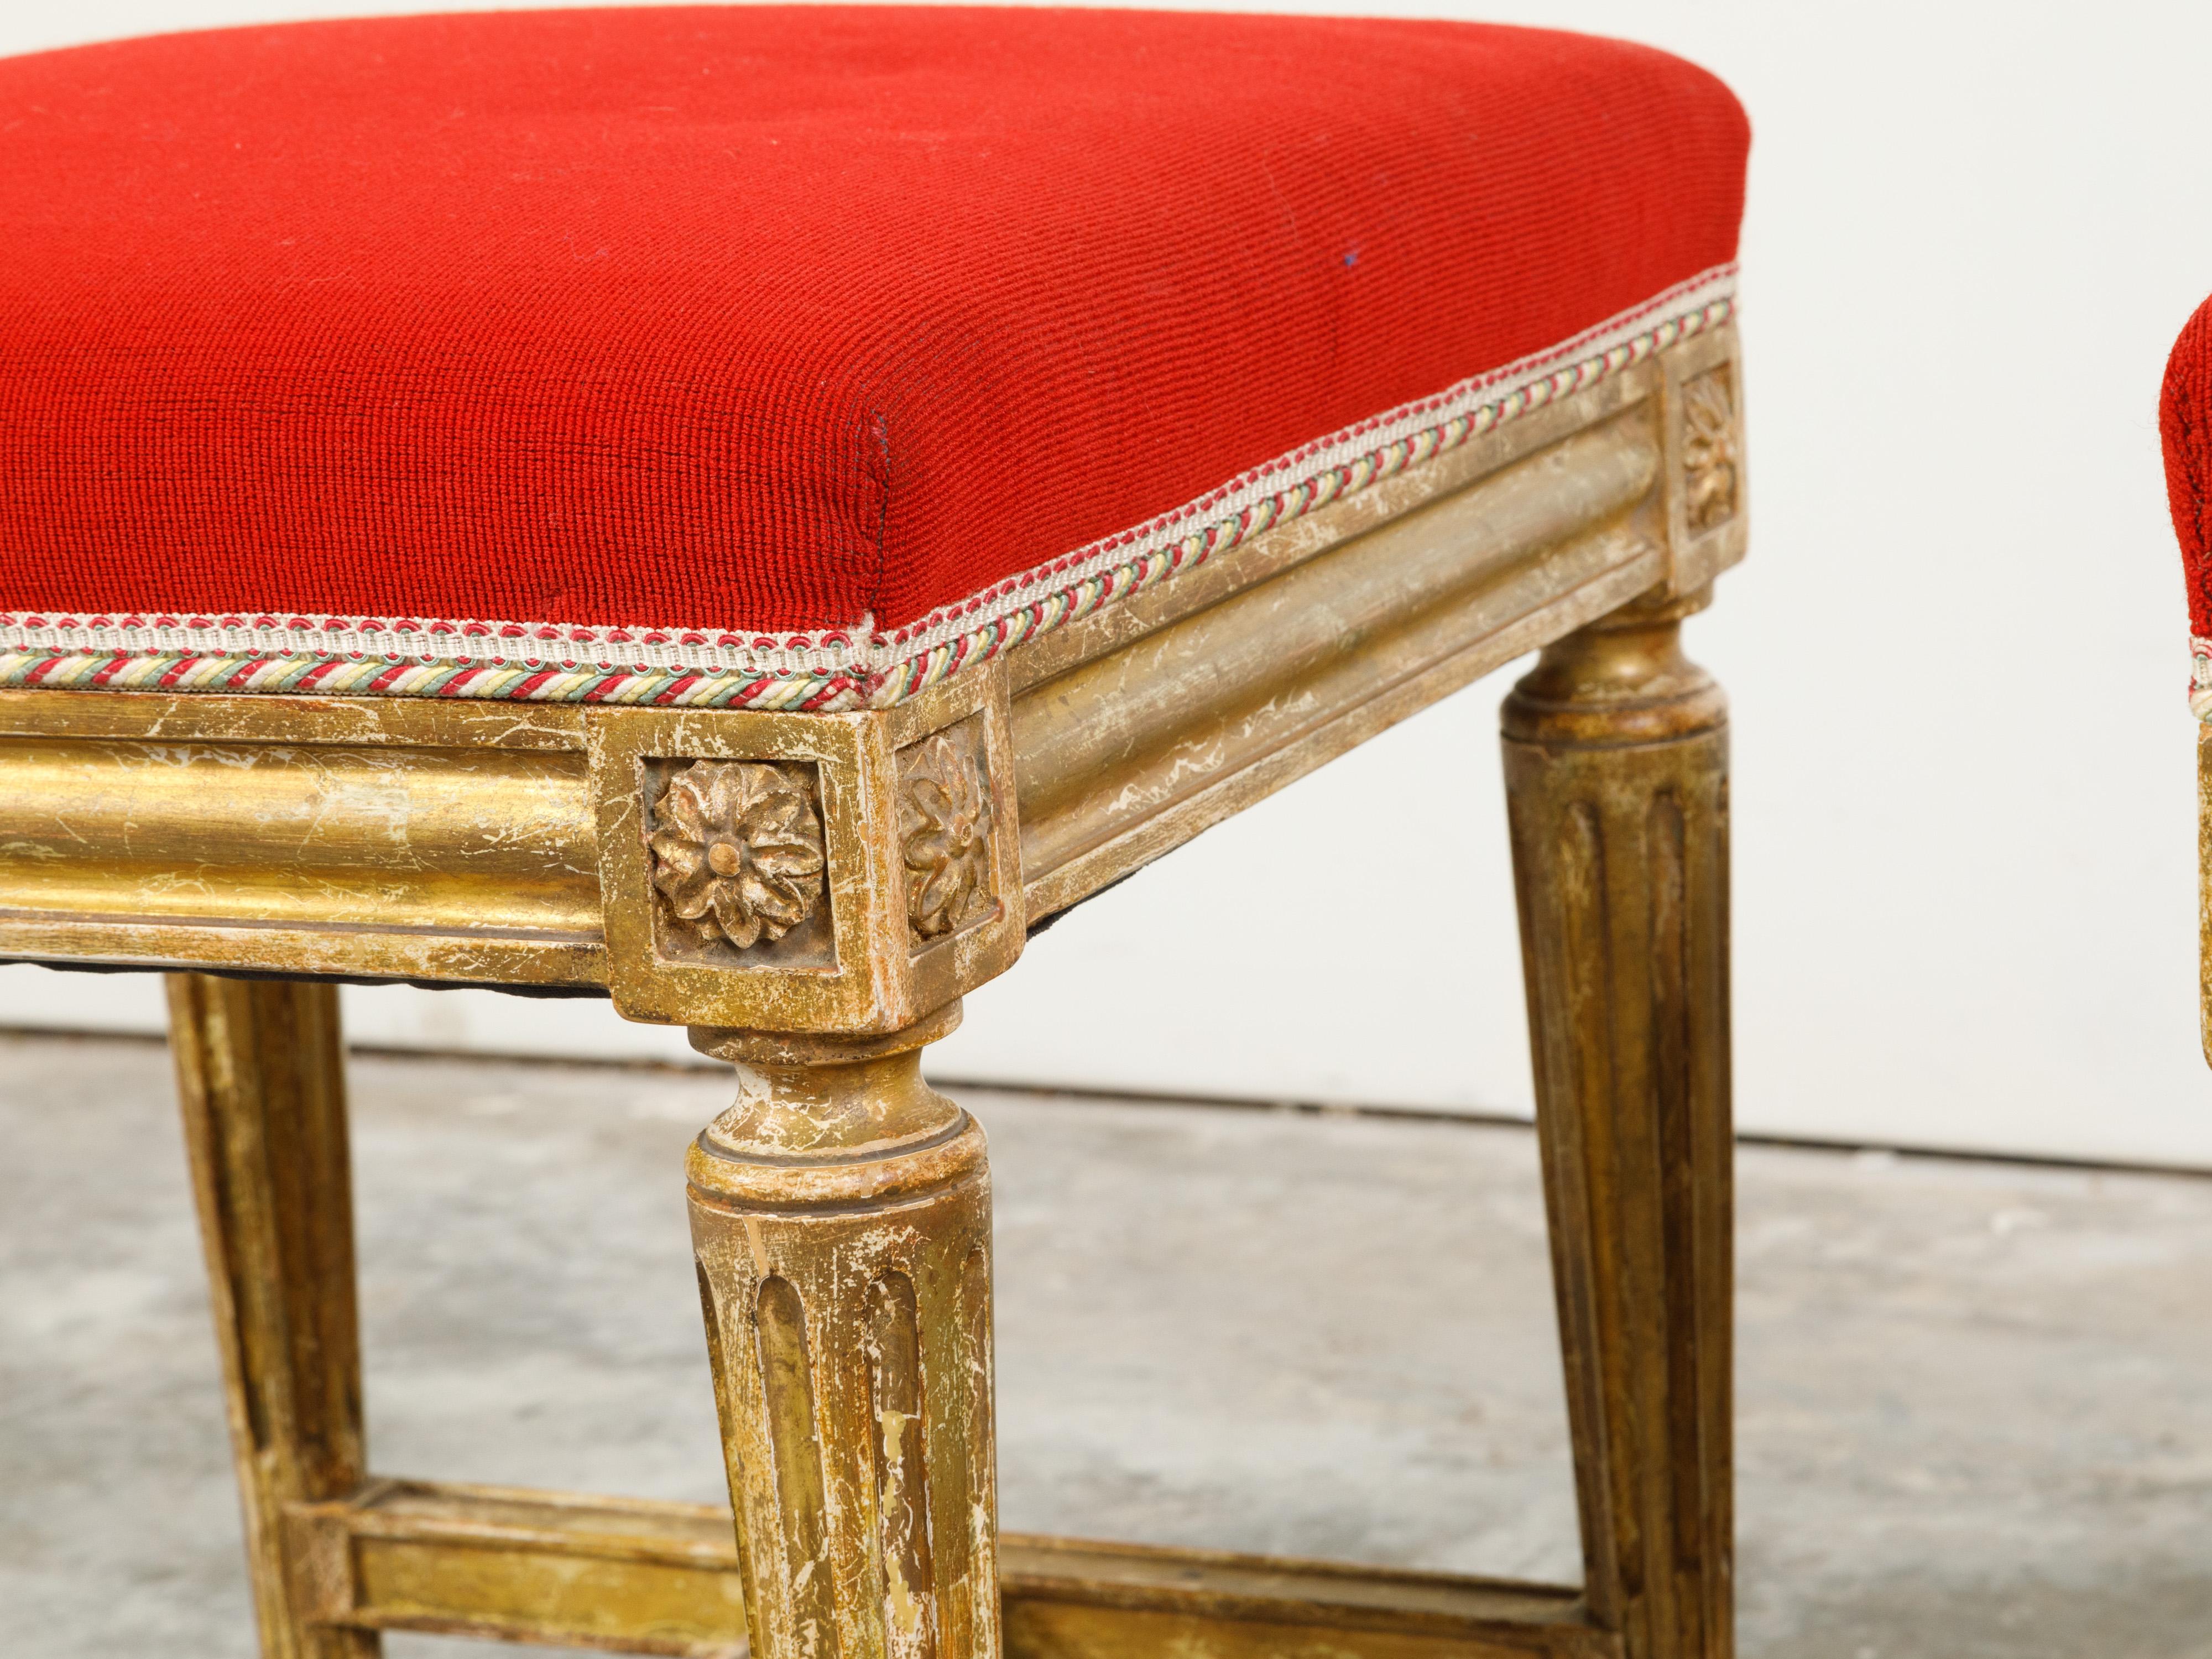 Pair of Neoclassical Style 19th Century Painted Stools with Red Upholstery For Sale 3